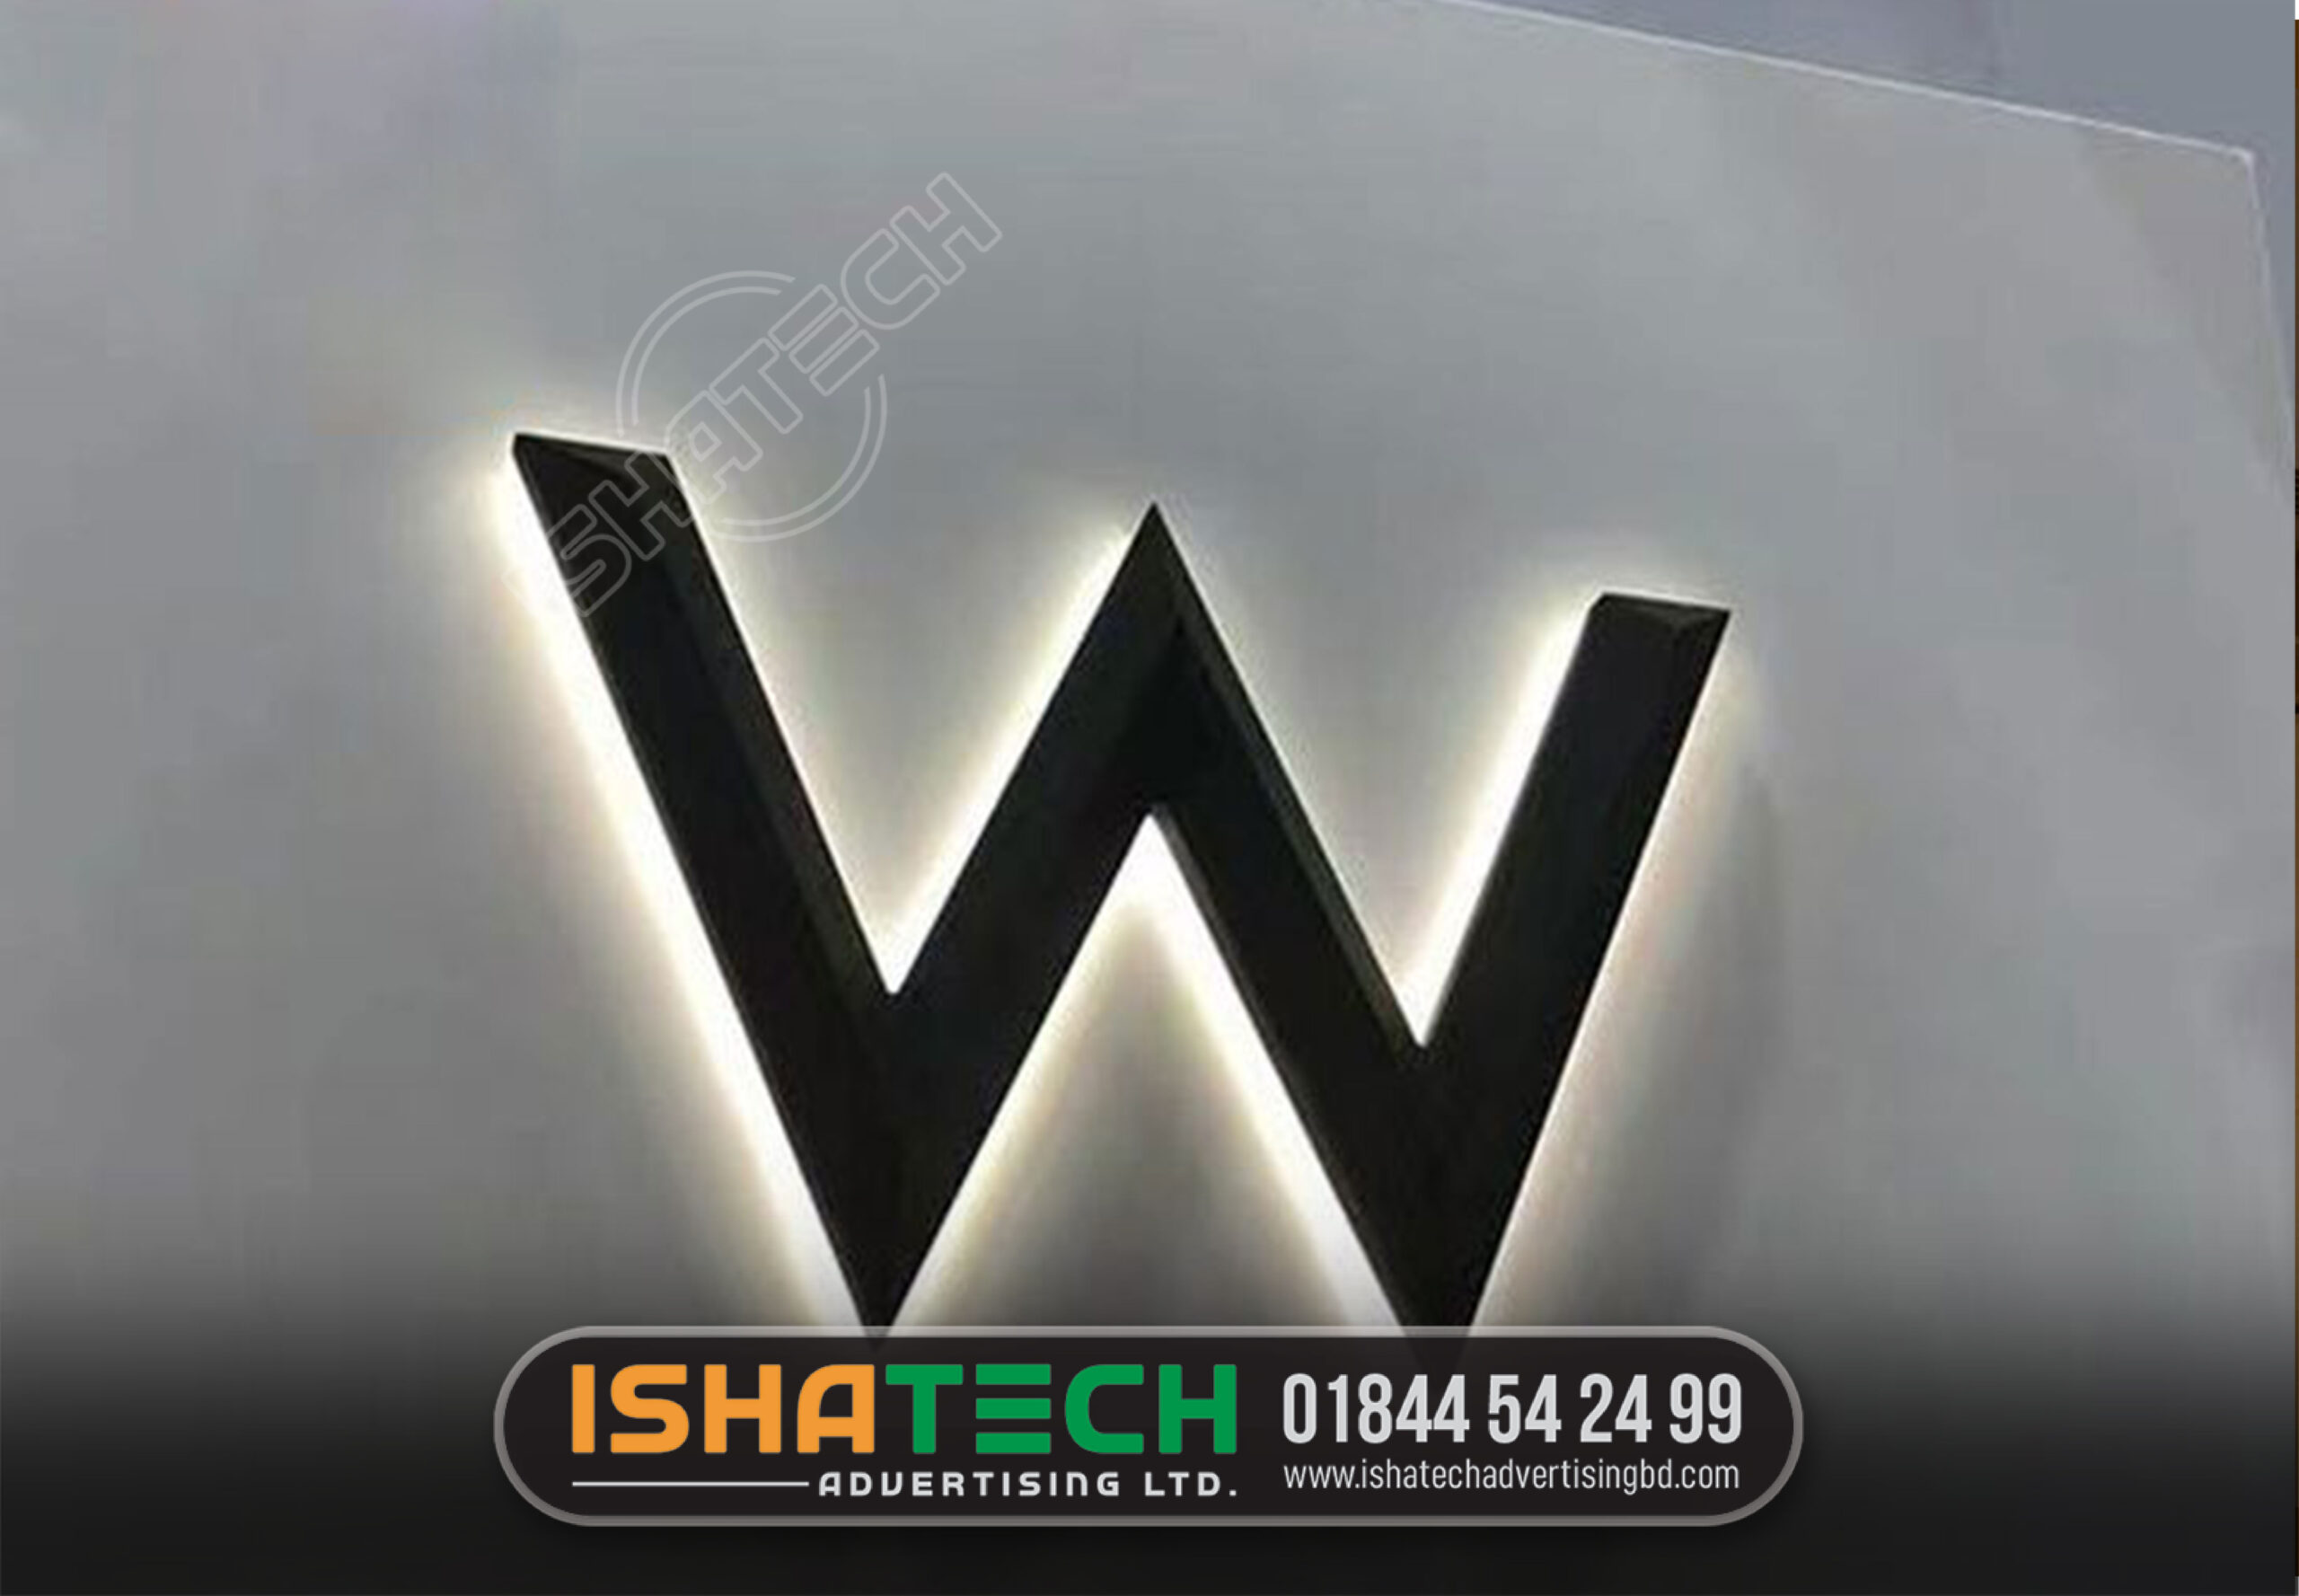 W CAPITAL LETTER, ALPHABET ACRYLIC 3D LETTER MAKING BY ISHATECH ADVERTISING LTD.